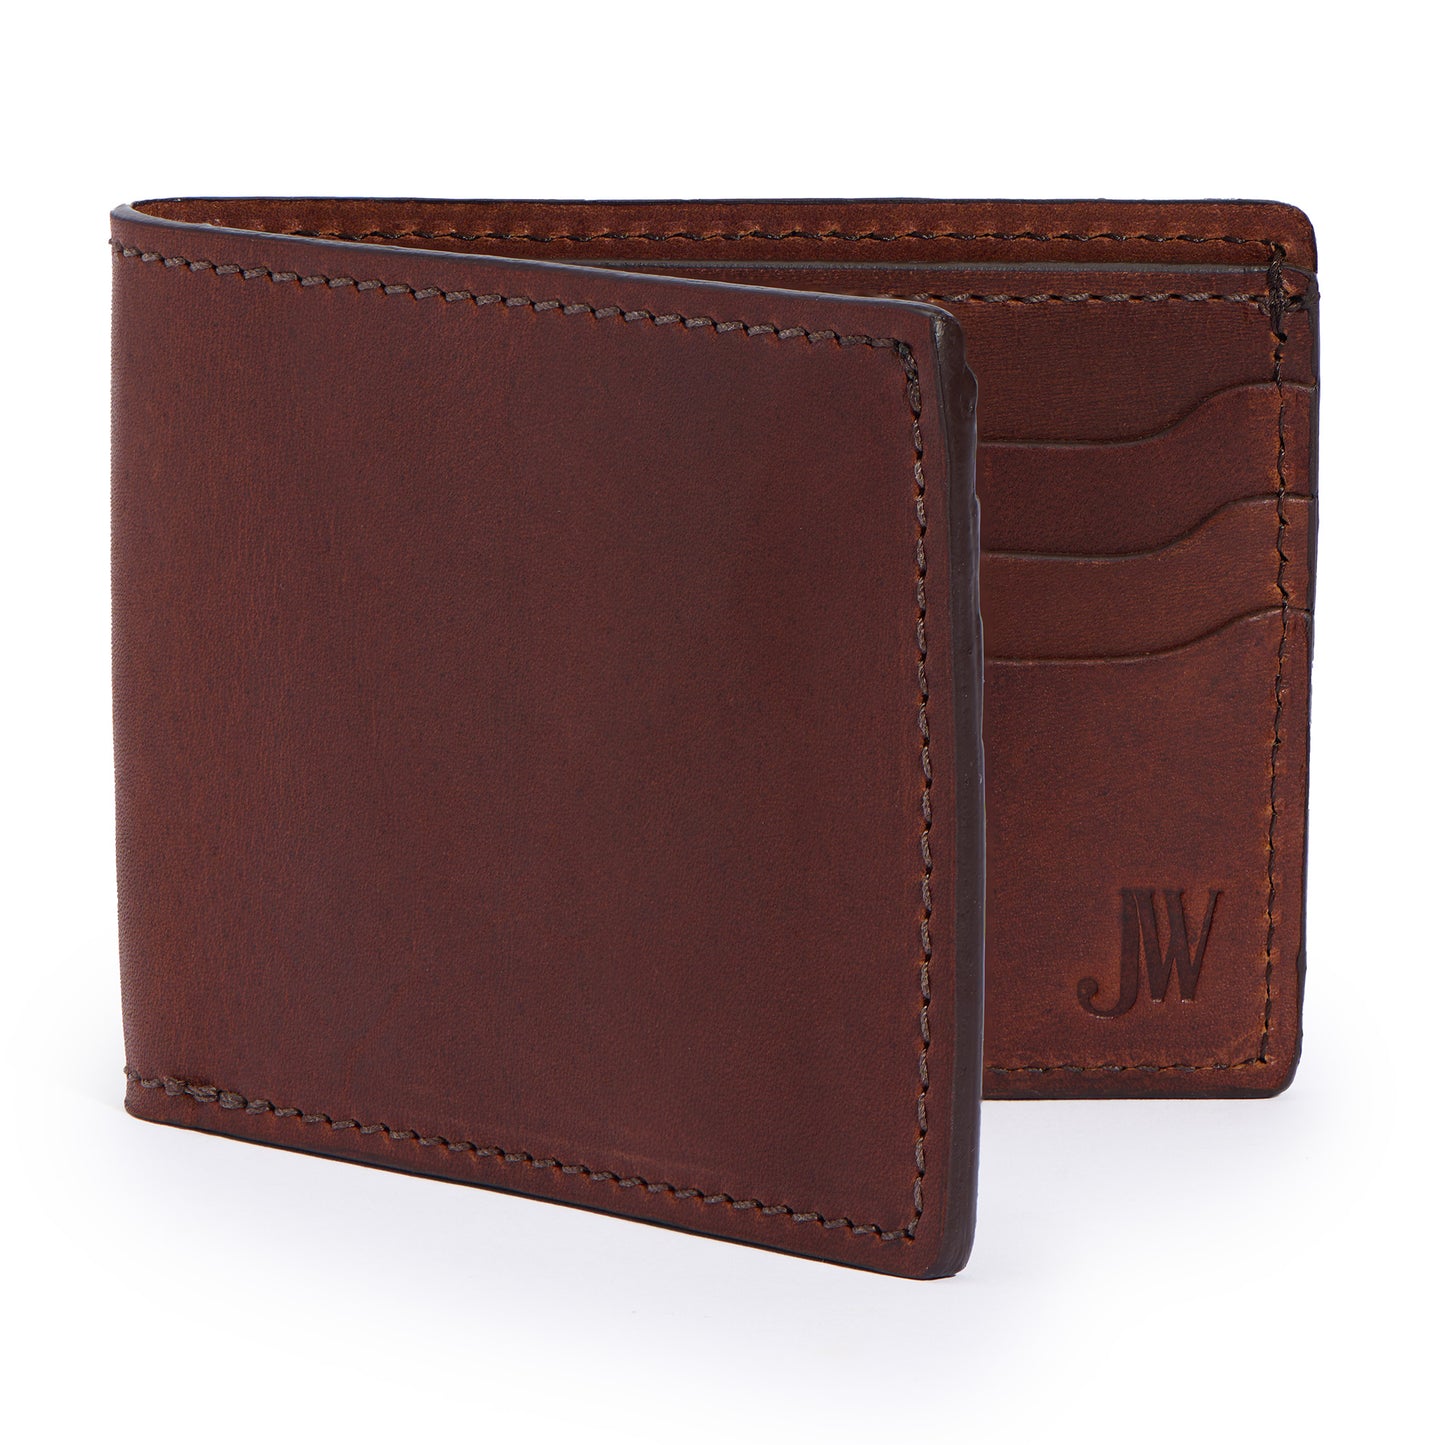 front full grain leather classic bifold wallet by Jackson Wayne in vintage brown color